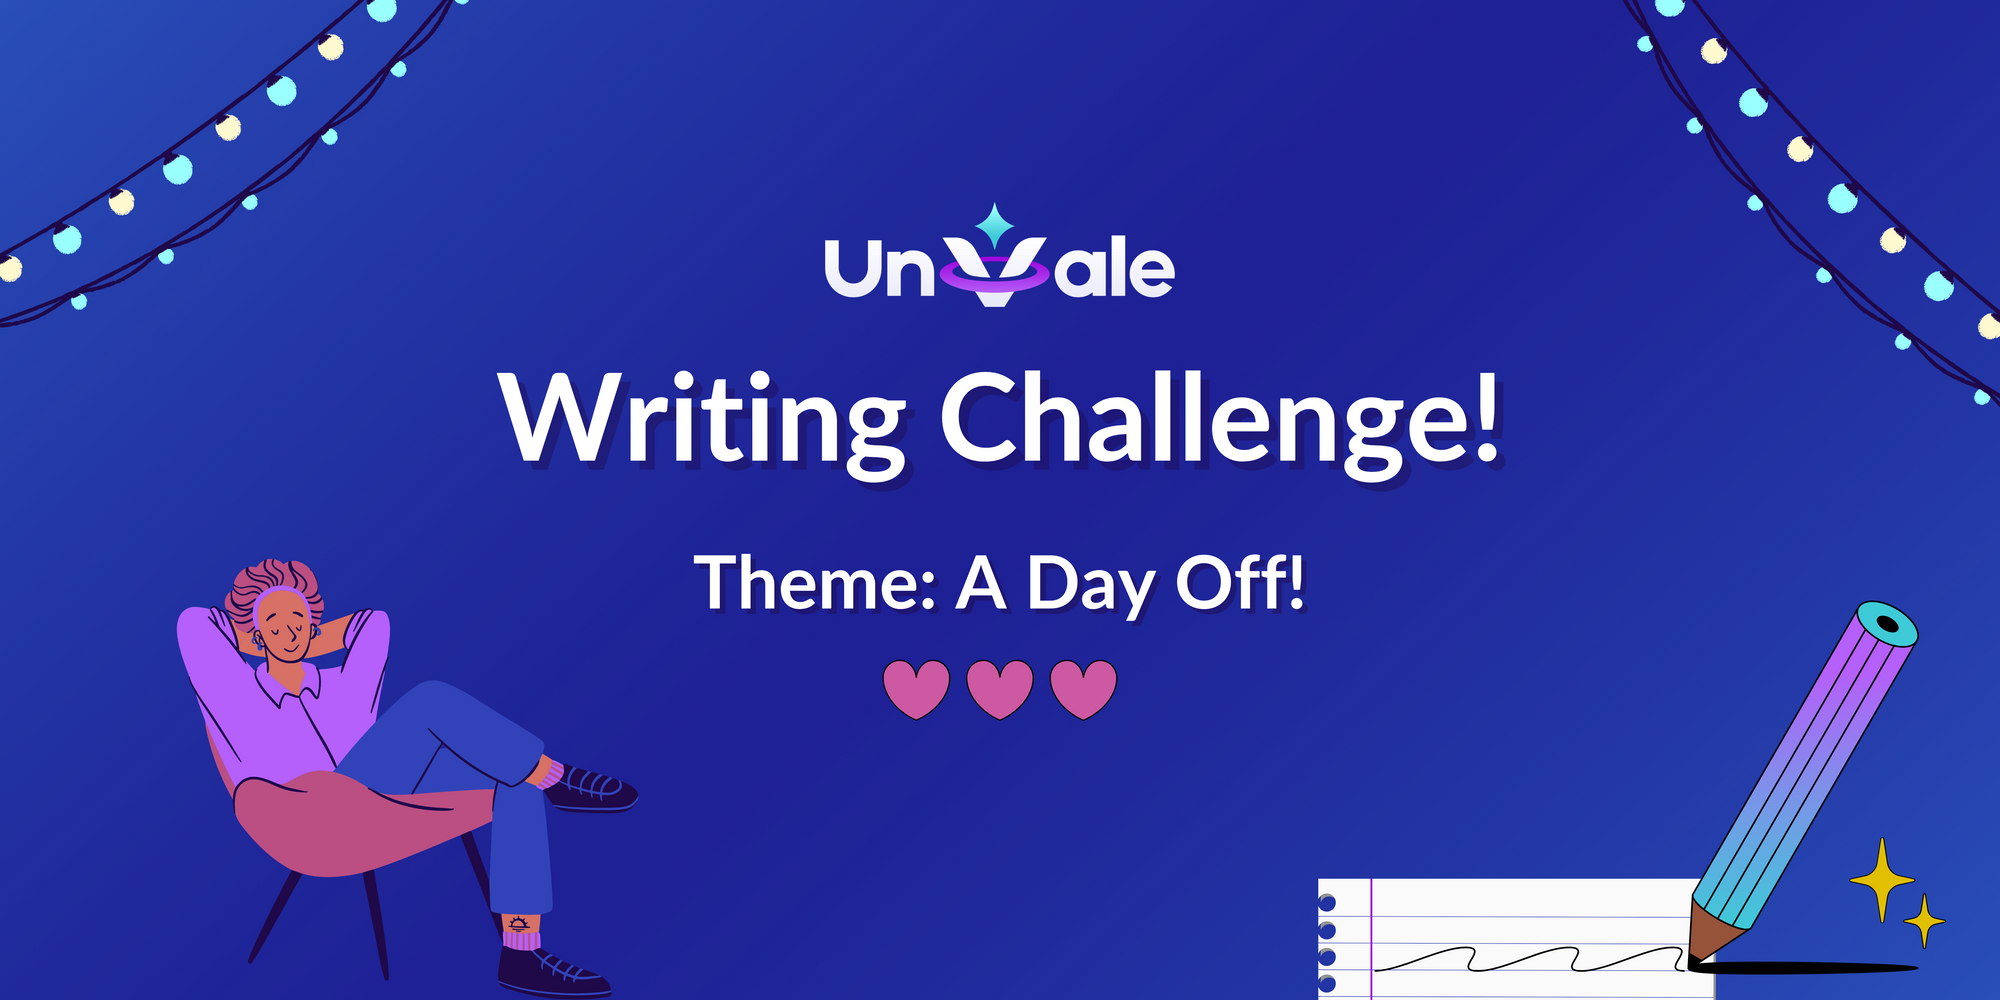 UnVale's Writing Challenge: A Day Off